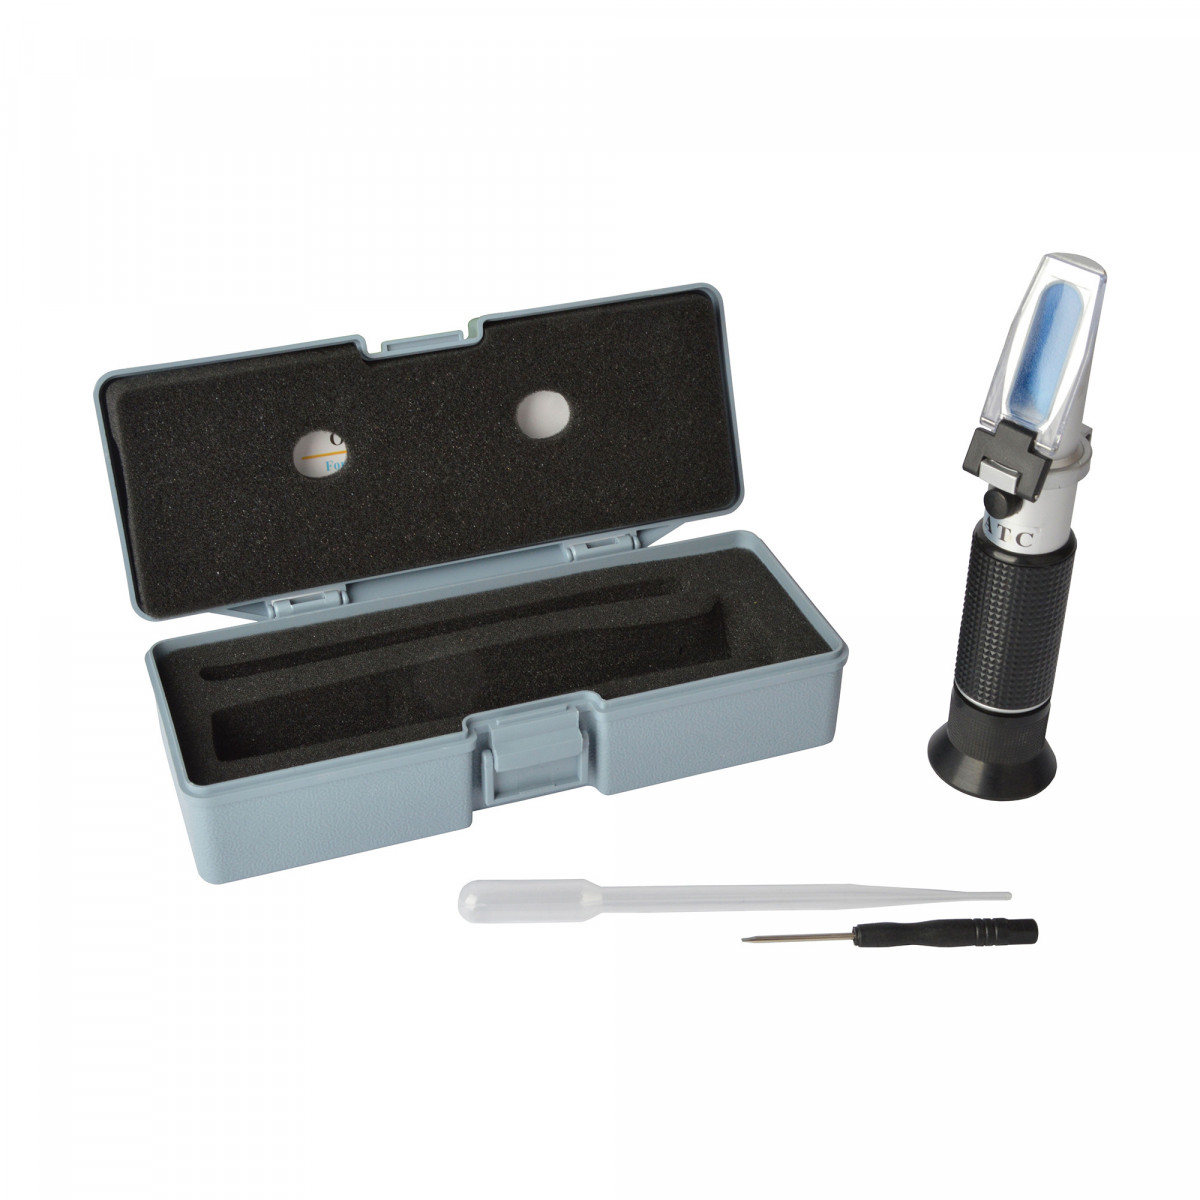 Refractometer 0-170°Oe / 0-25 vol% with ATC